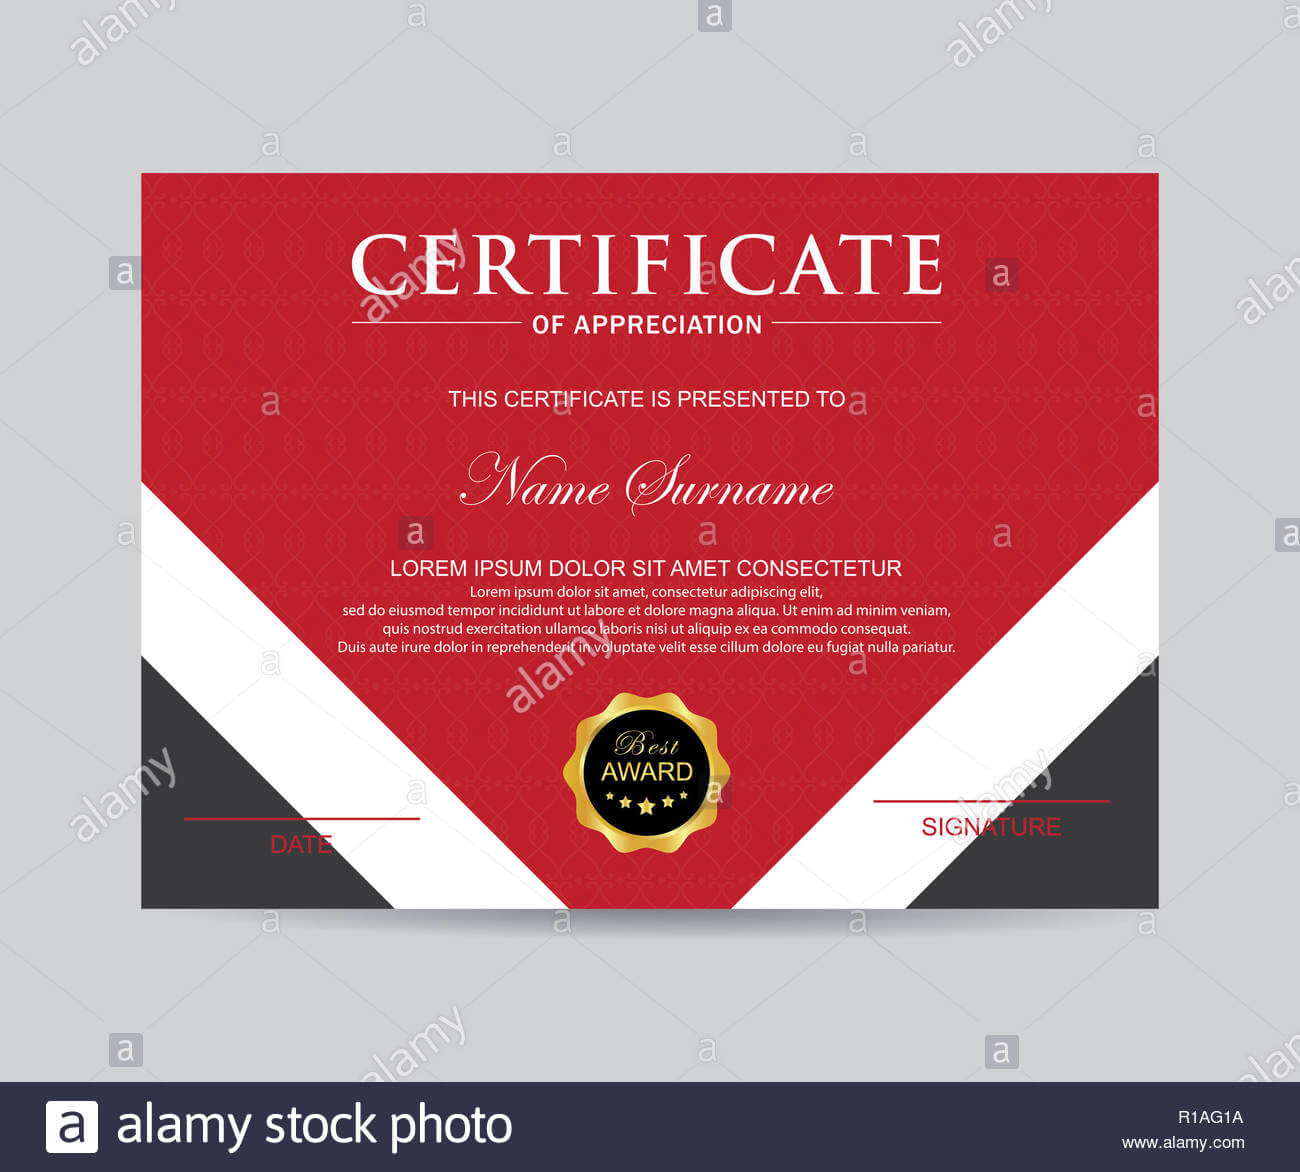 Modern Certificate Template And Background Stock Photo Throughout Borderless Certificate Templates